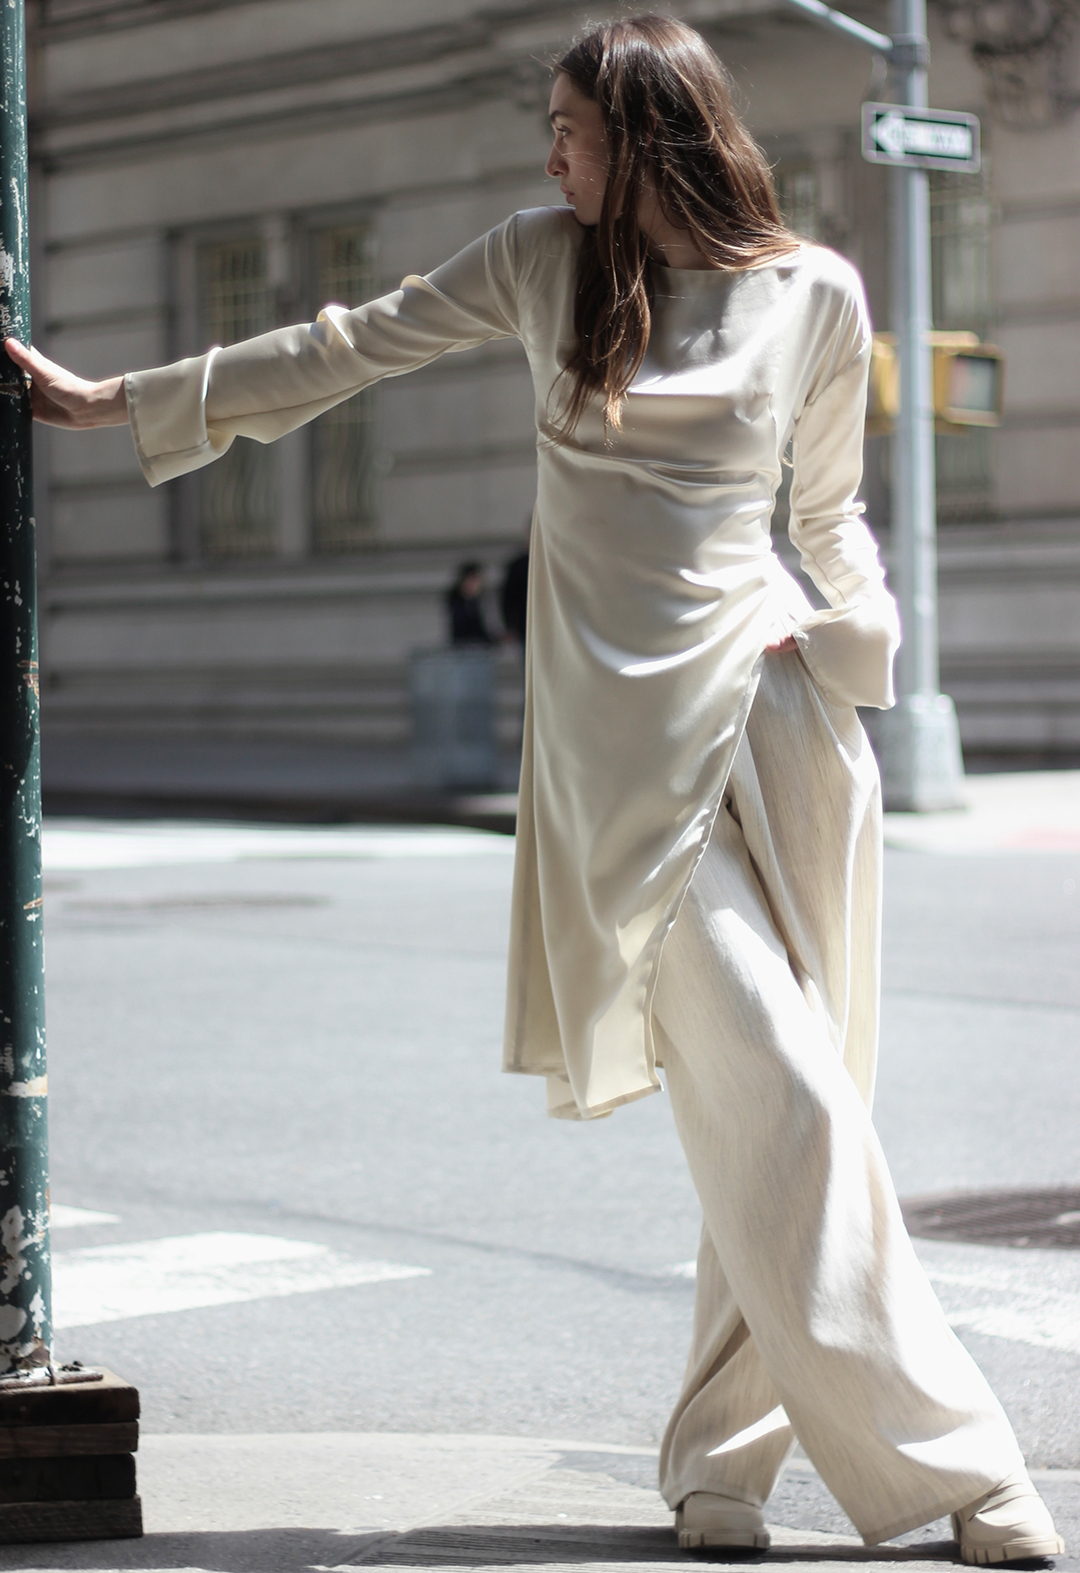 The model is looking to the side with one arm on a pole and her other hand in her pants pocket.  She has one leg crossed over the other. She is wearing a cream silk tunic with a high neck and a side cutaway to highlight her cream pleated wide-legged pants.